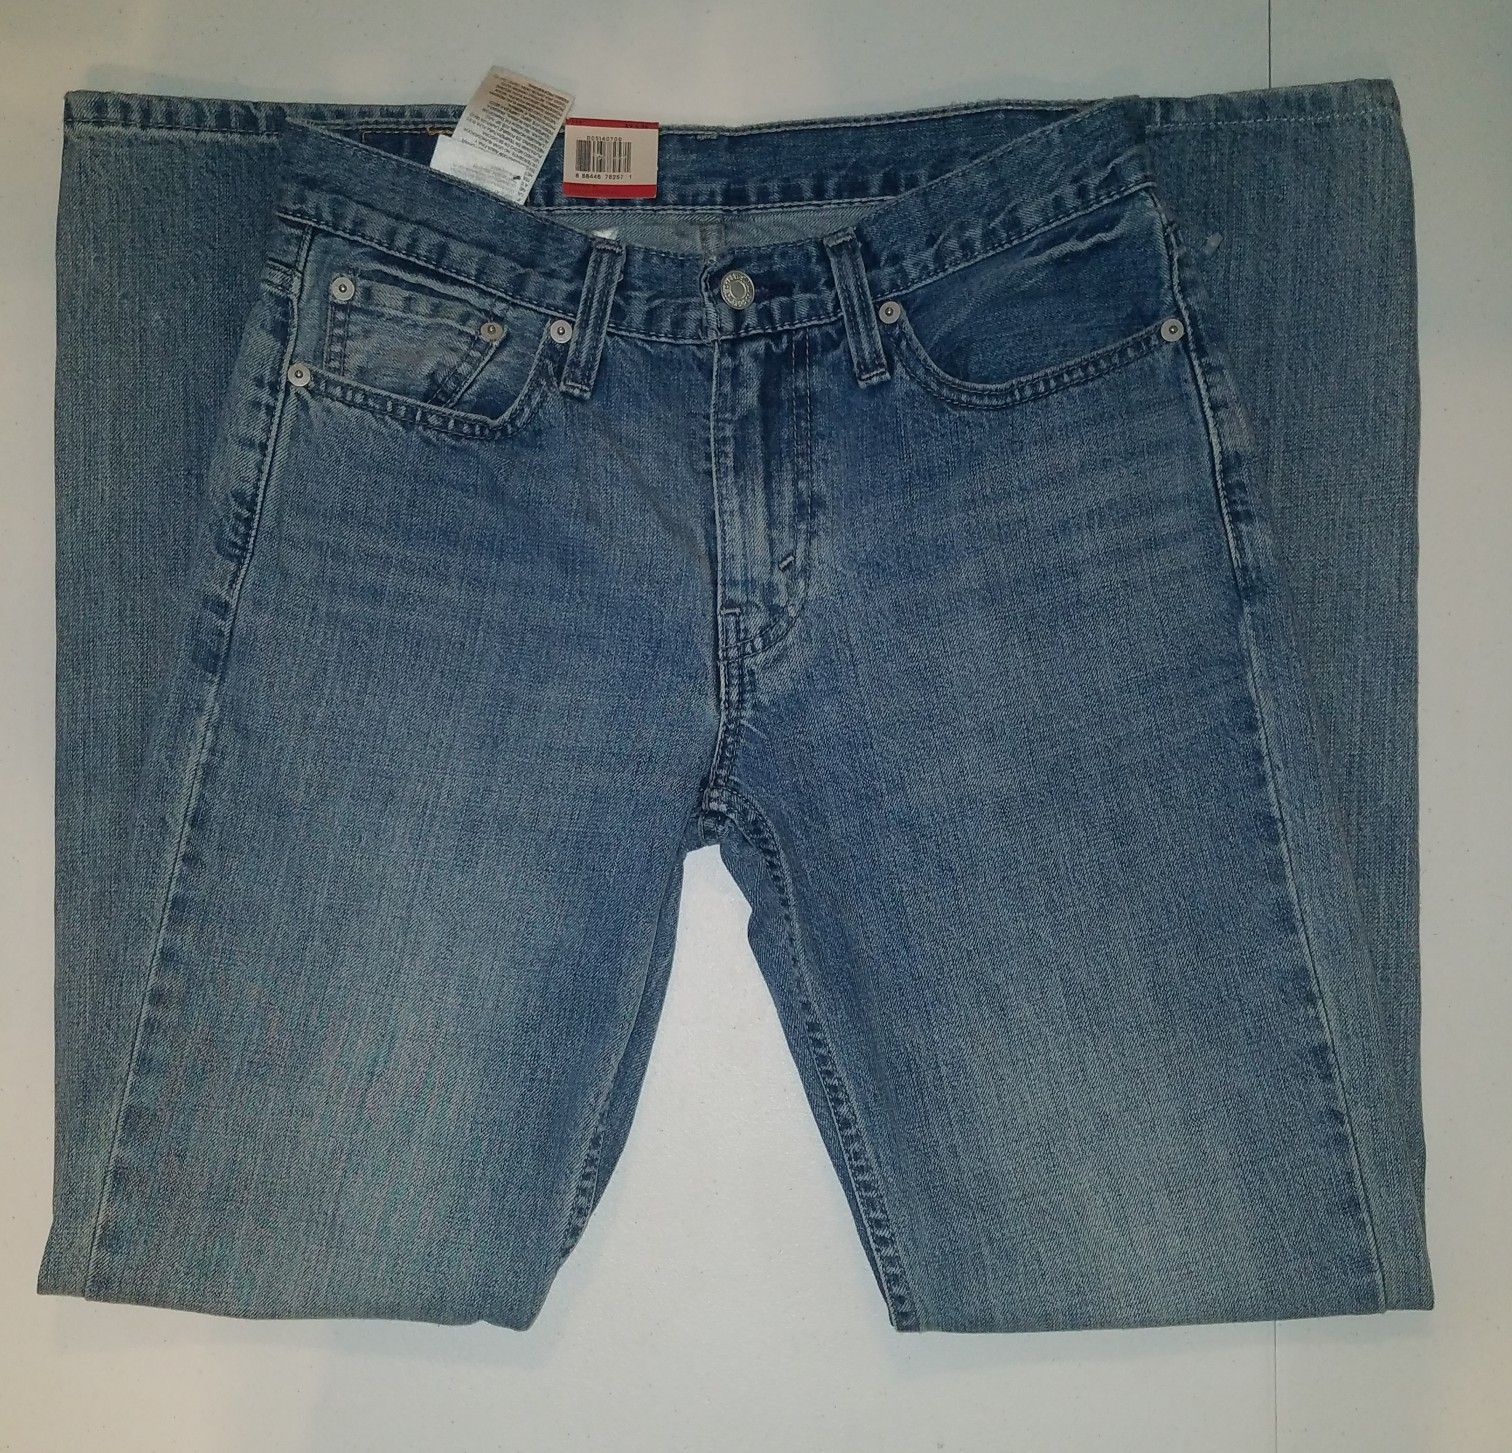 New levi Jean's size 29x32 $30 each